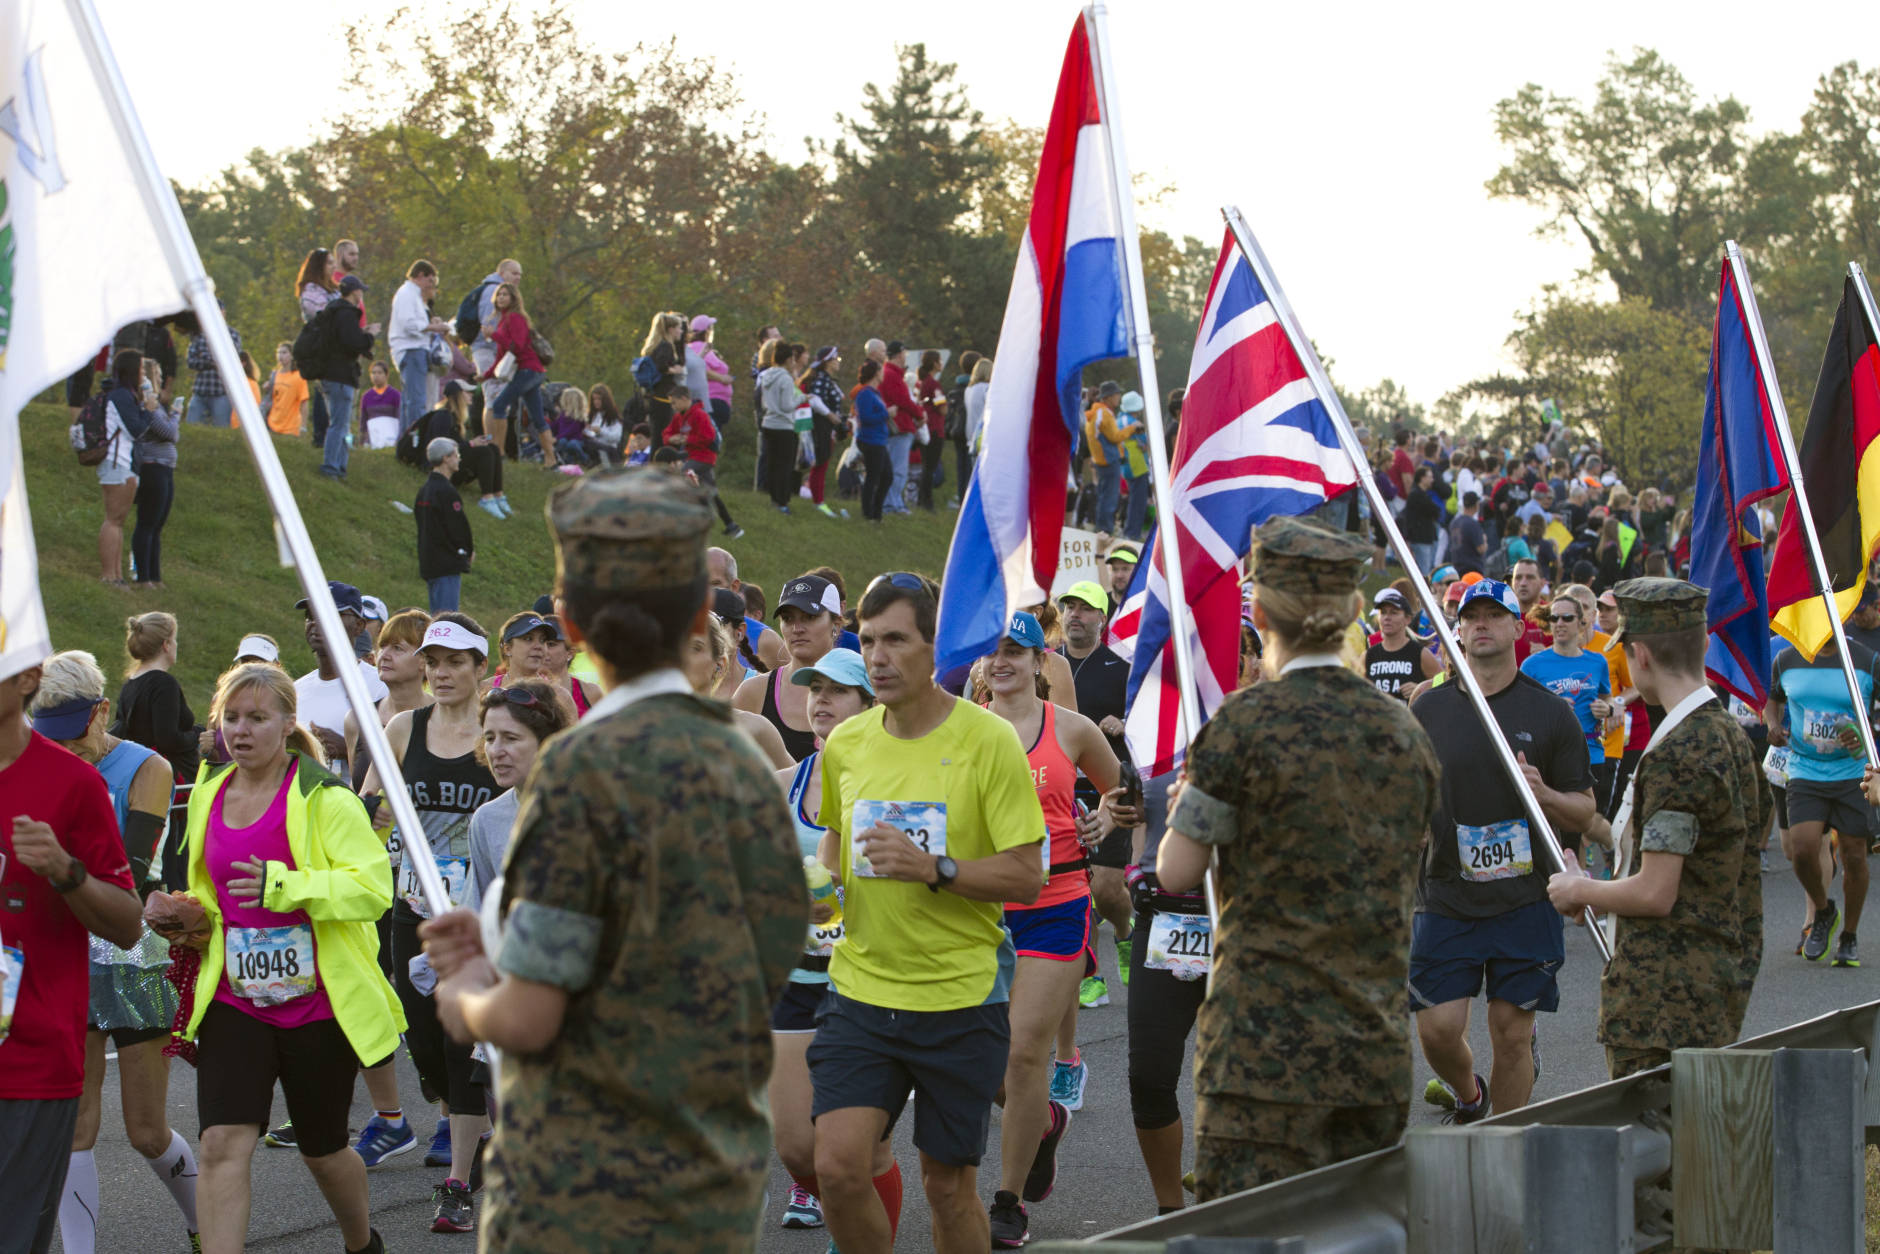 Runners compete in the 41st Marine Corps Marathon, Sunday, Oct. 30, 2016 in Arlington, Va. The race includes runners from 55 nations and each branch of the U.S. armed forces. ( AP Photo/Jose Luis Magana)